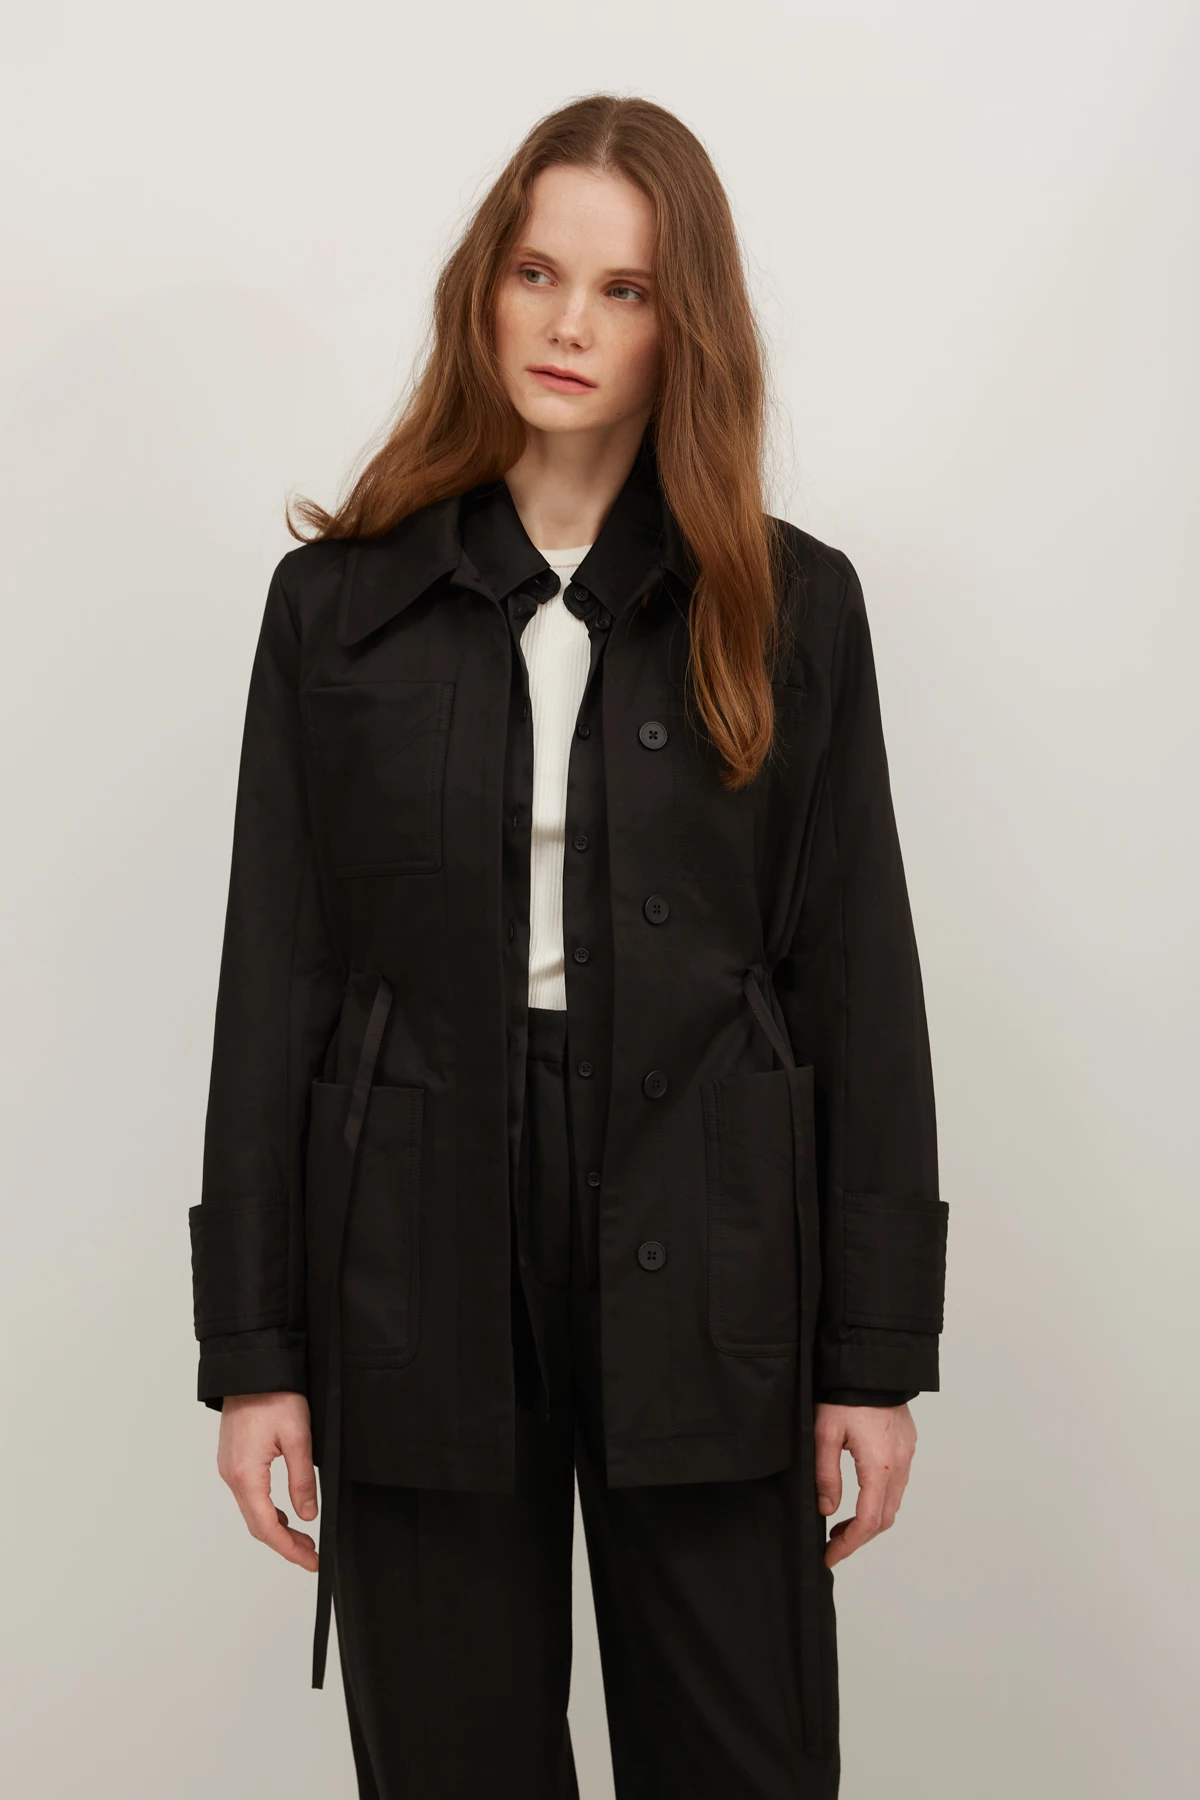 Short jacket with raincoat fabric in black color, photo 1